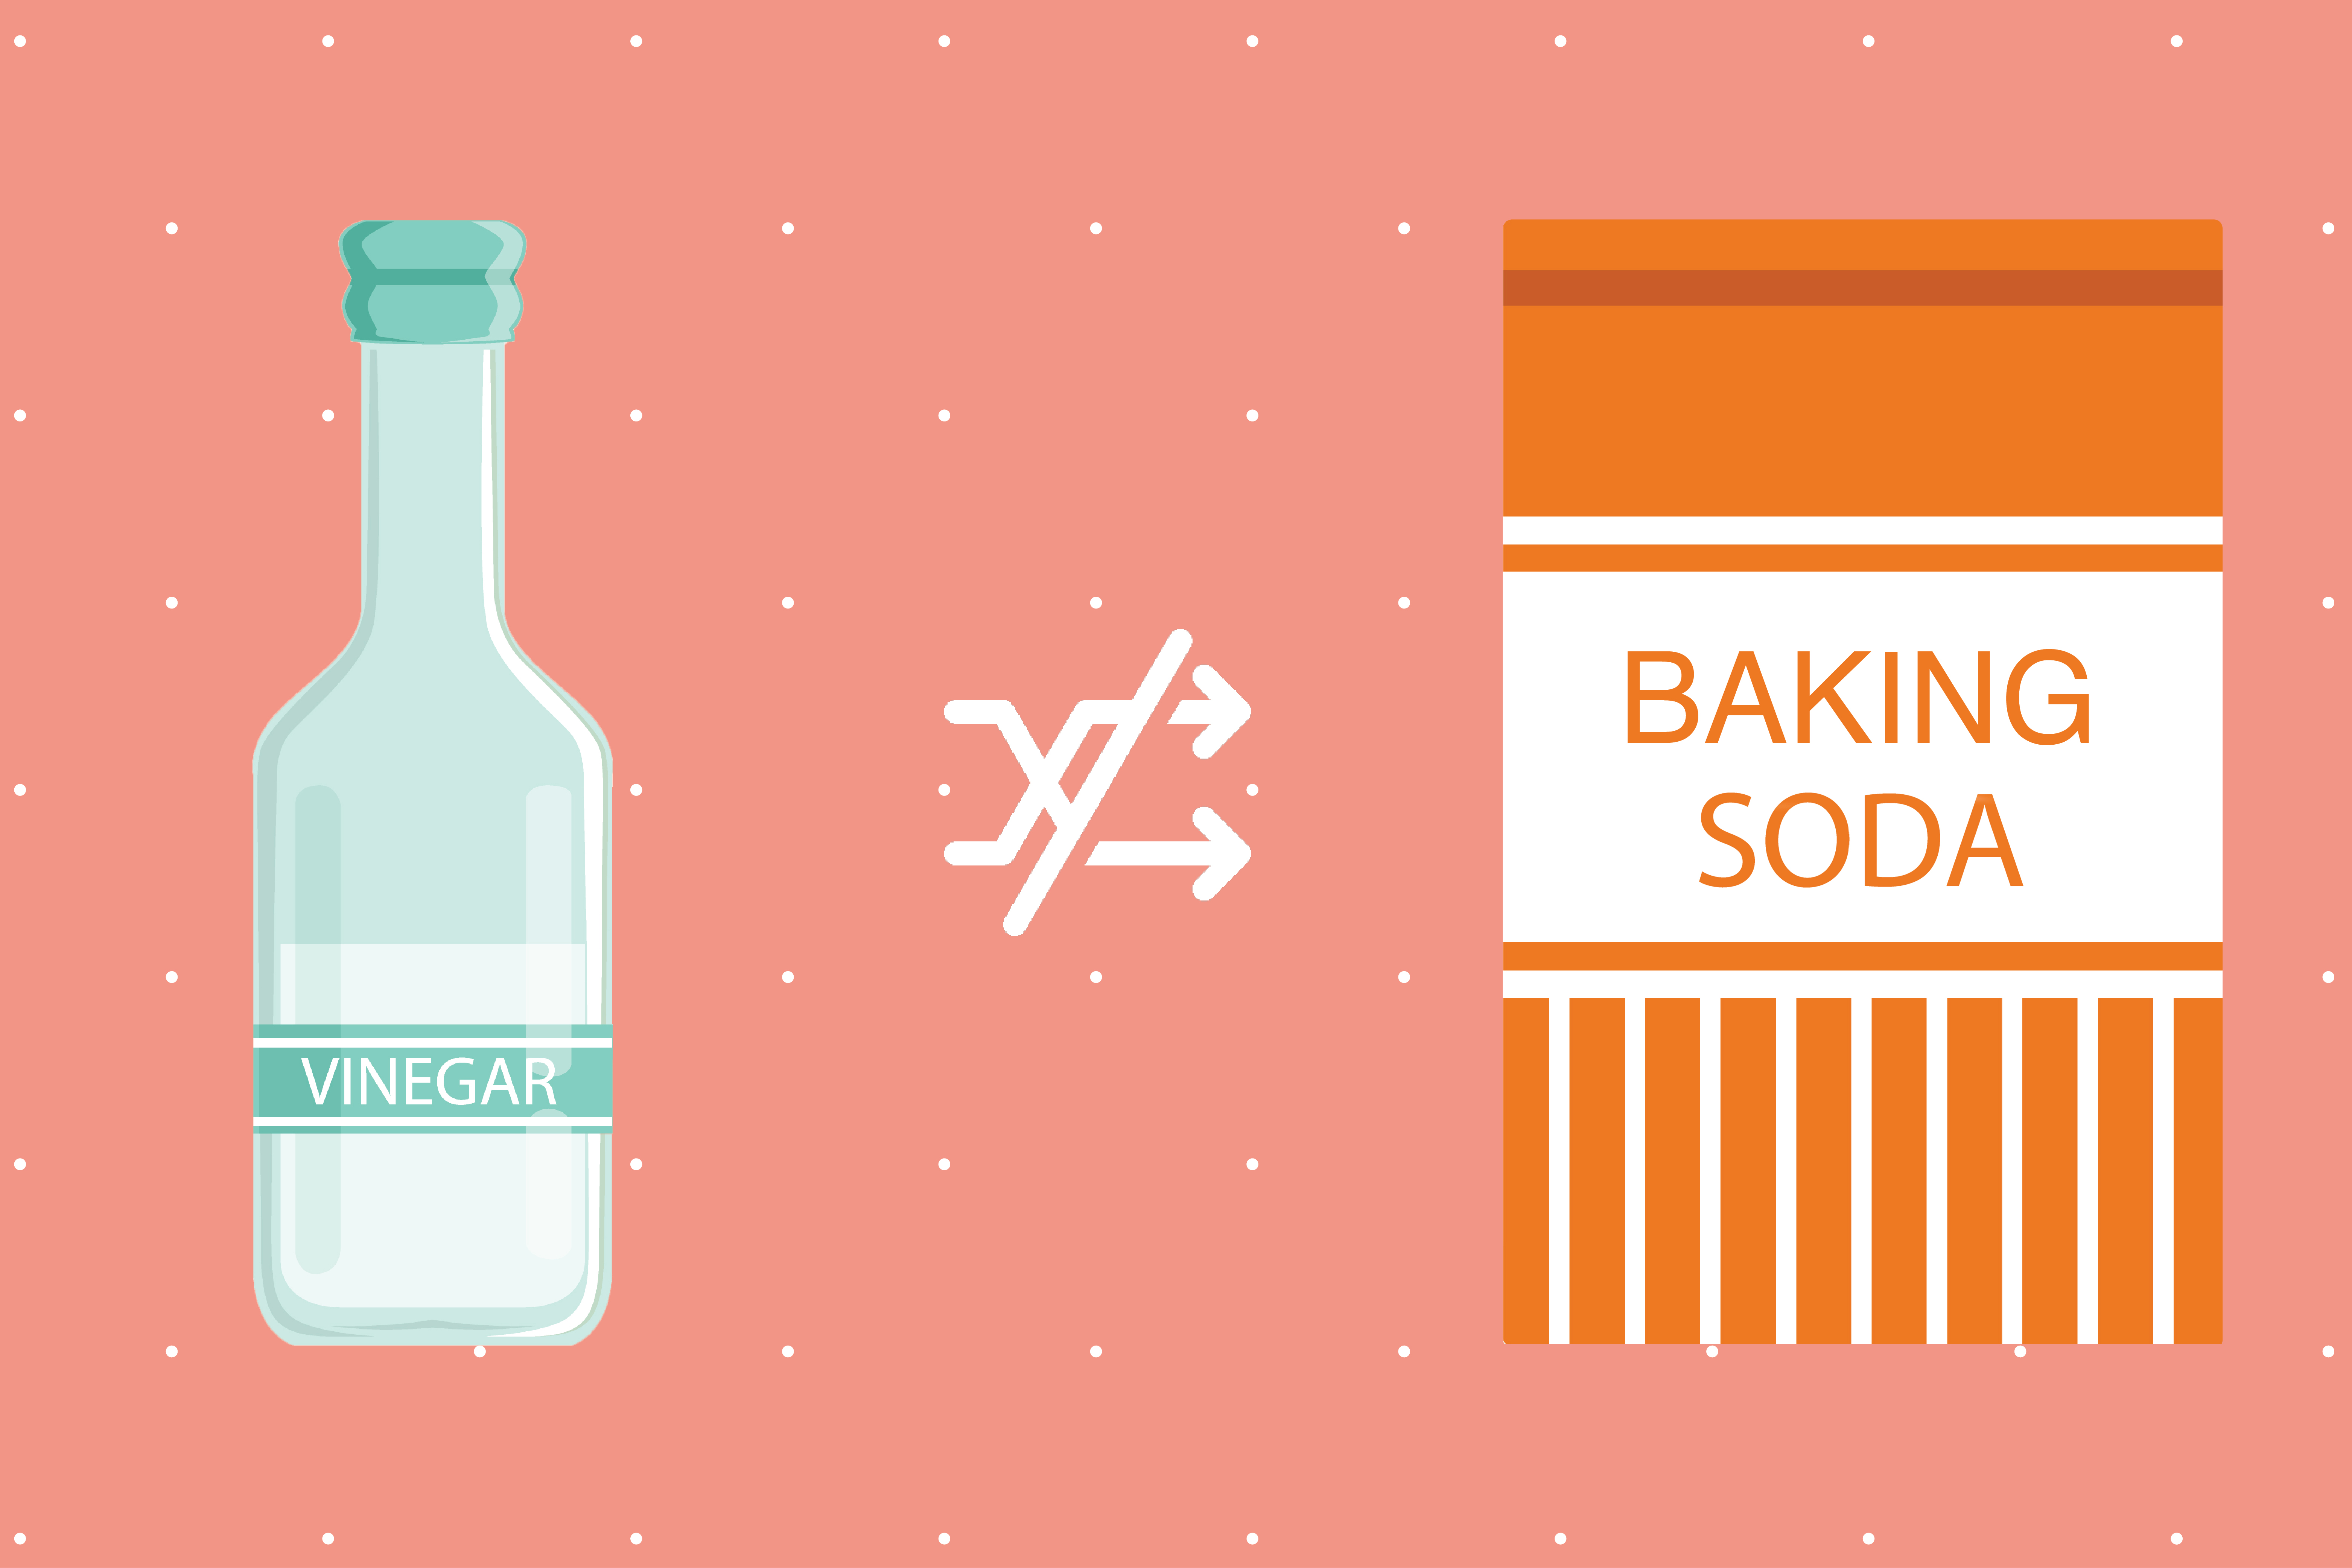 Vinegar and Baking Soda: A Powerful Drain Clearing Combination